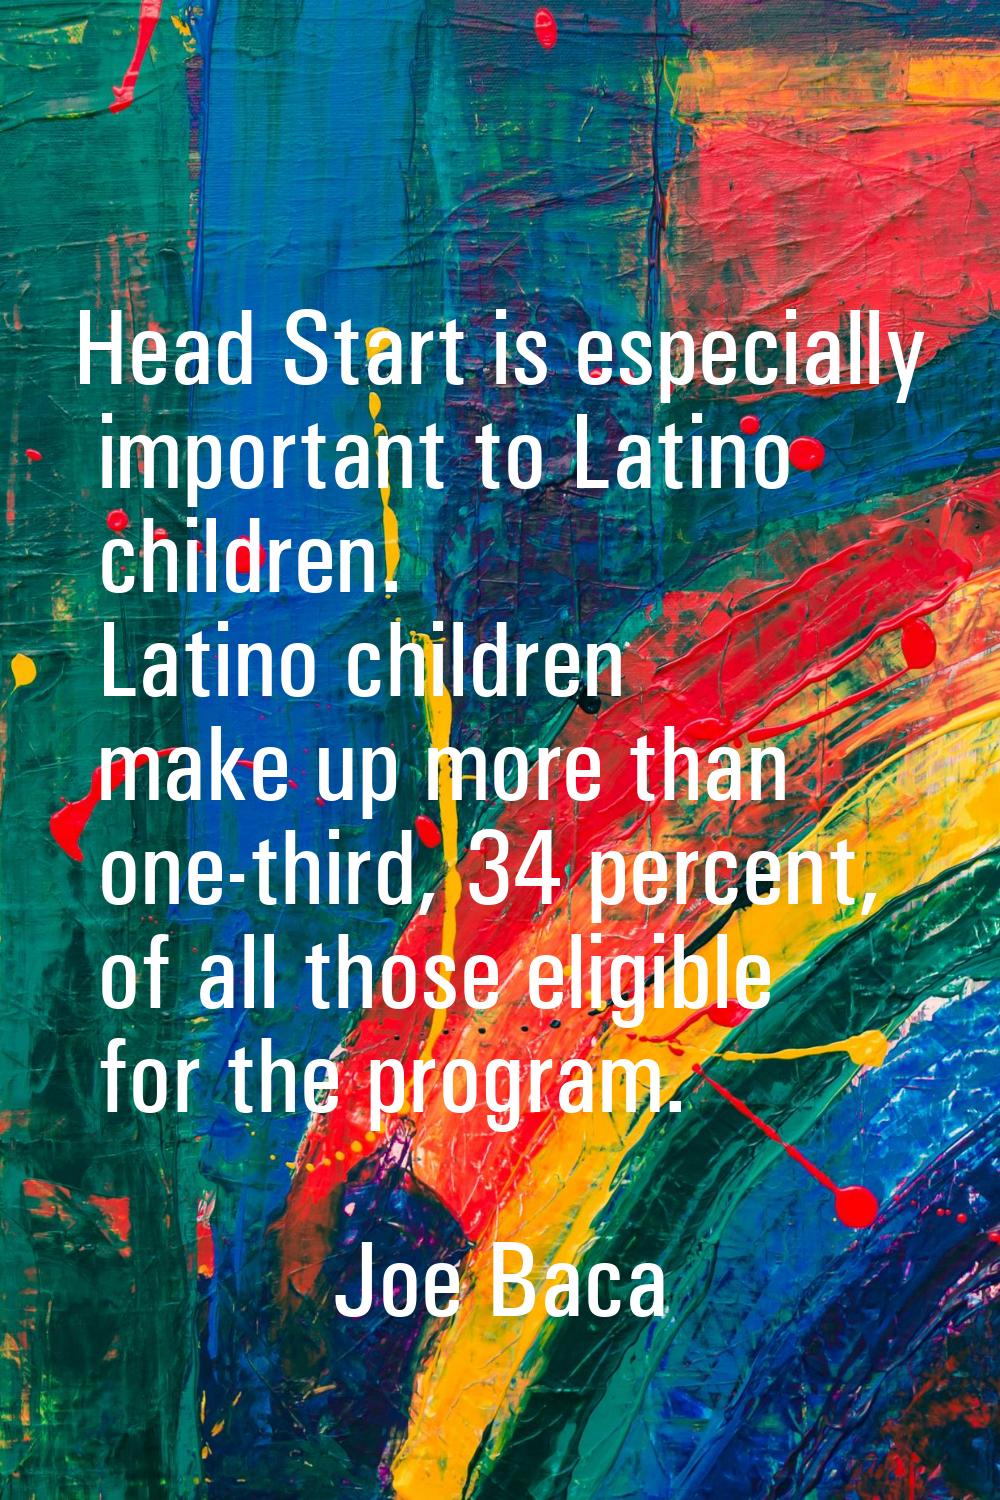 Head Start is especially important to Latino children. Latino children make up more than one-third,